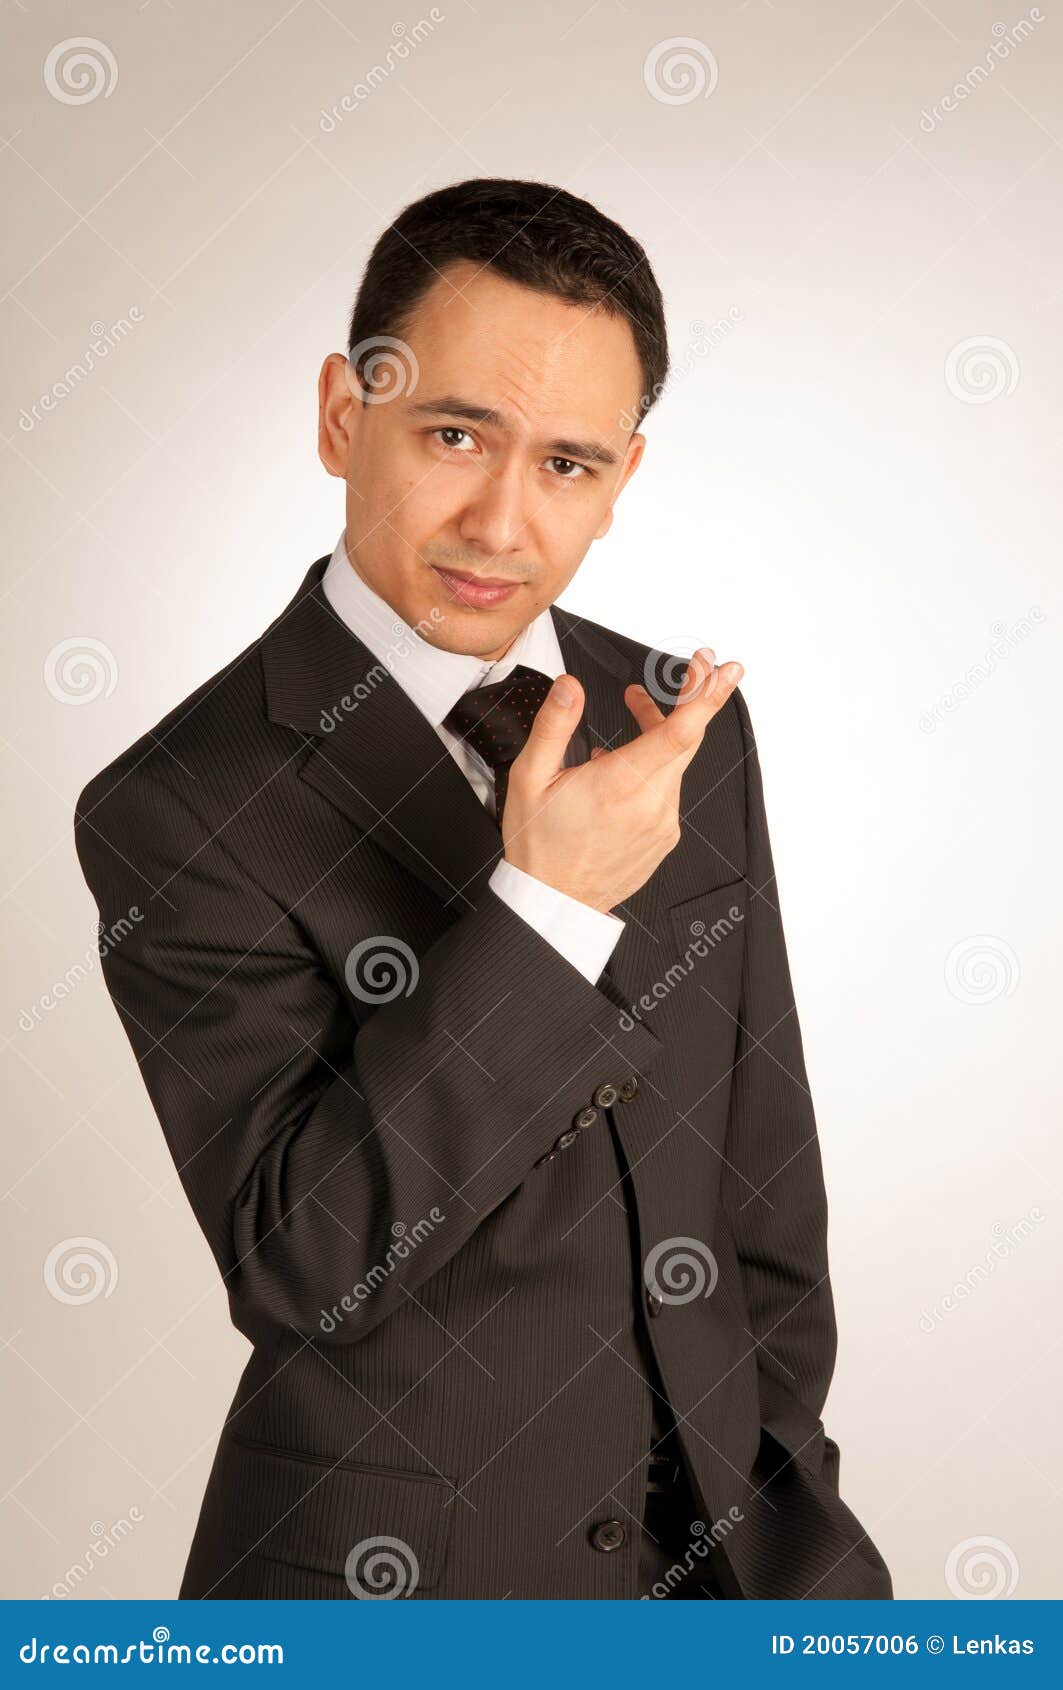 young selfconfident businessman in a suit